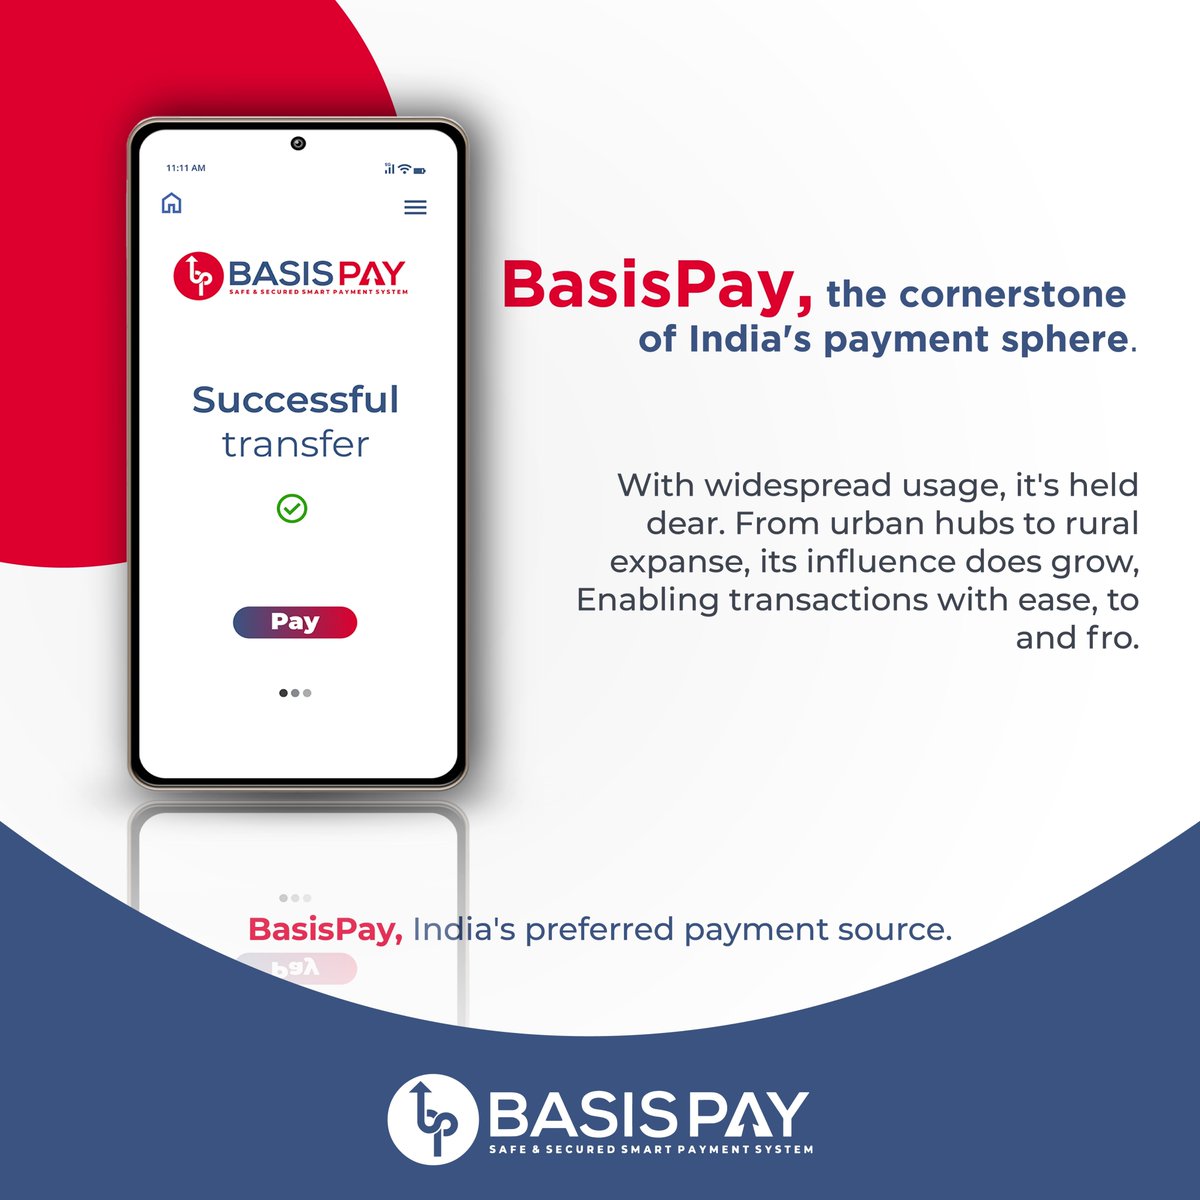 BasisPay payment system #basispay #upi #pointofsale #contactlesspayments #buy #bank #finance #news #online #mobile #shopping #pos #qrpay #qr #digitalpayment #payments #paymentgateway #india #digitalmoney #debitcard #creditcard #buy #digital #mobilepayment #world #ai